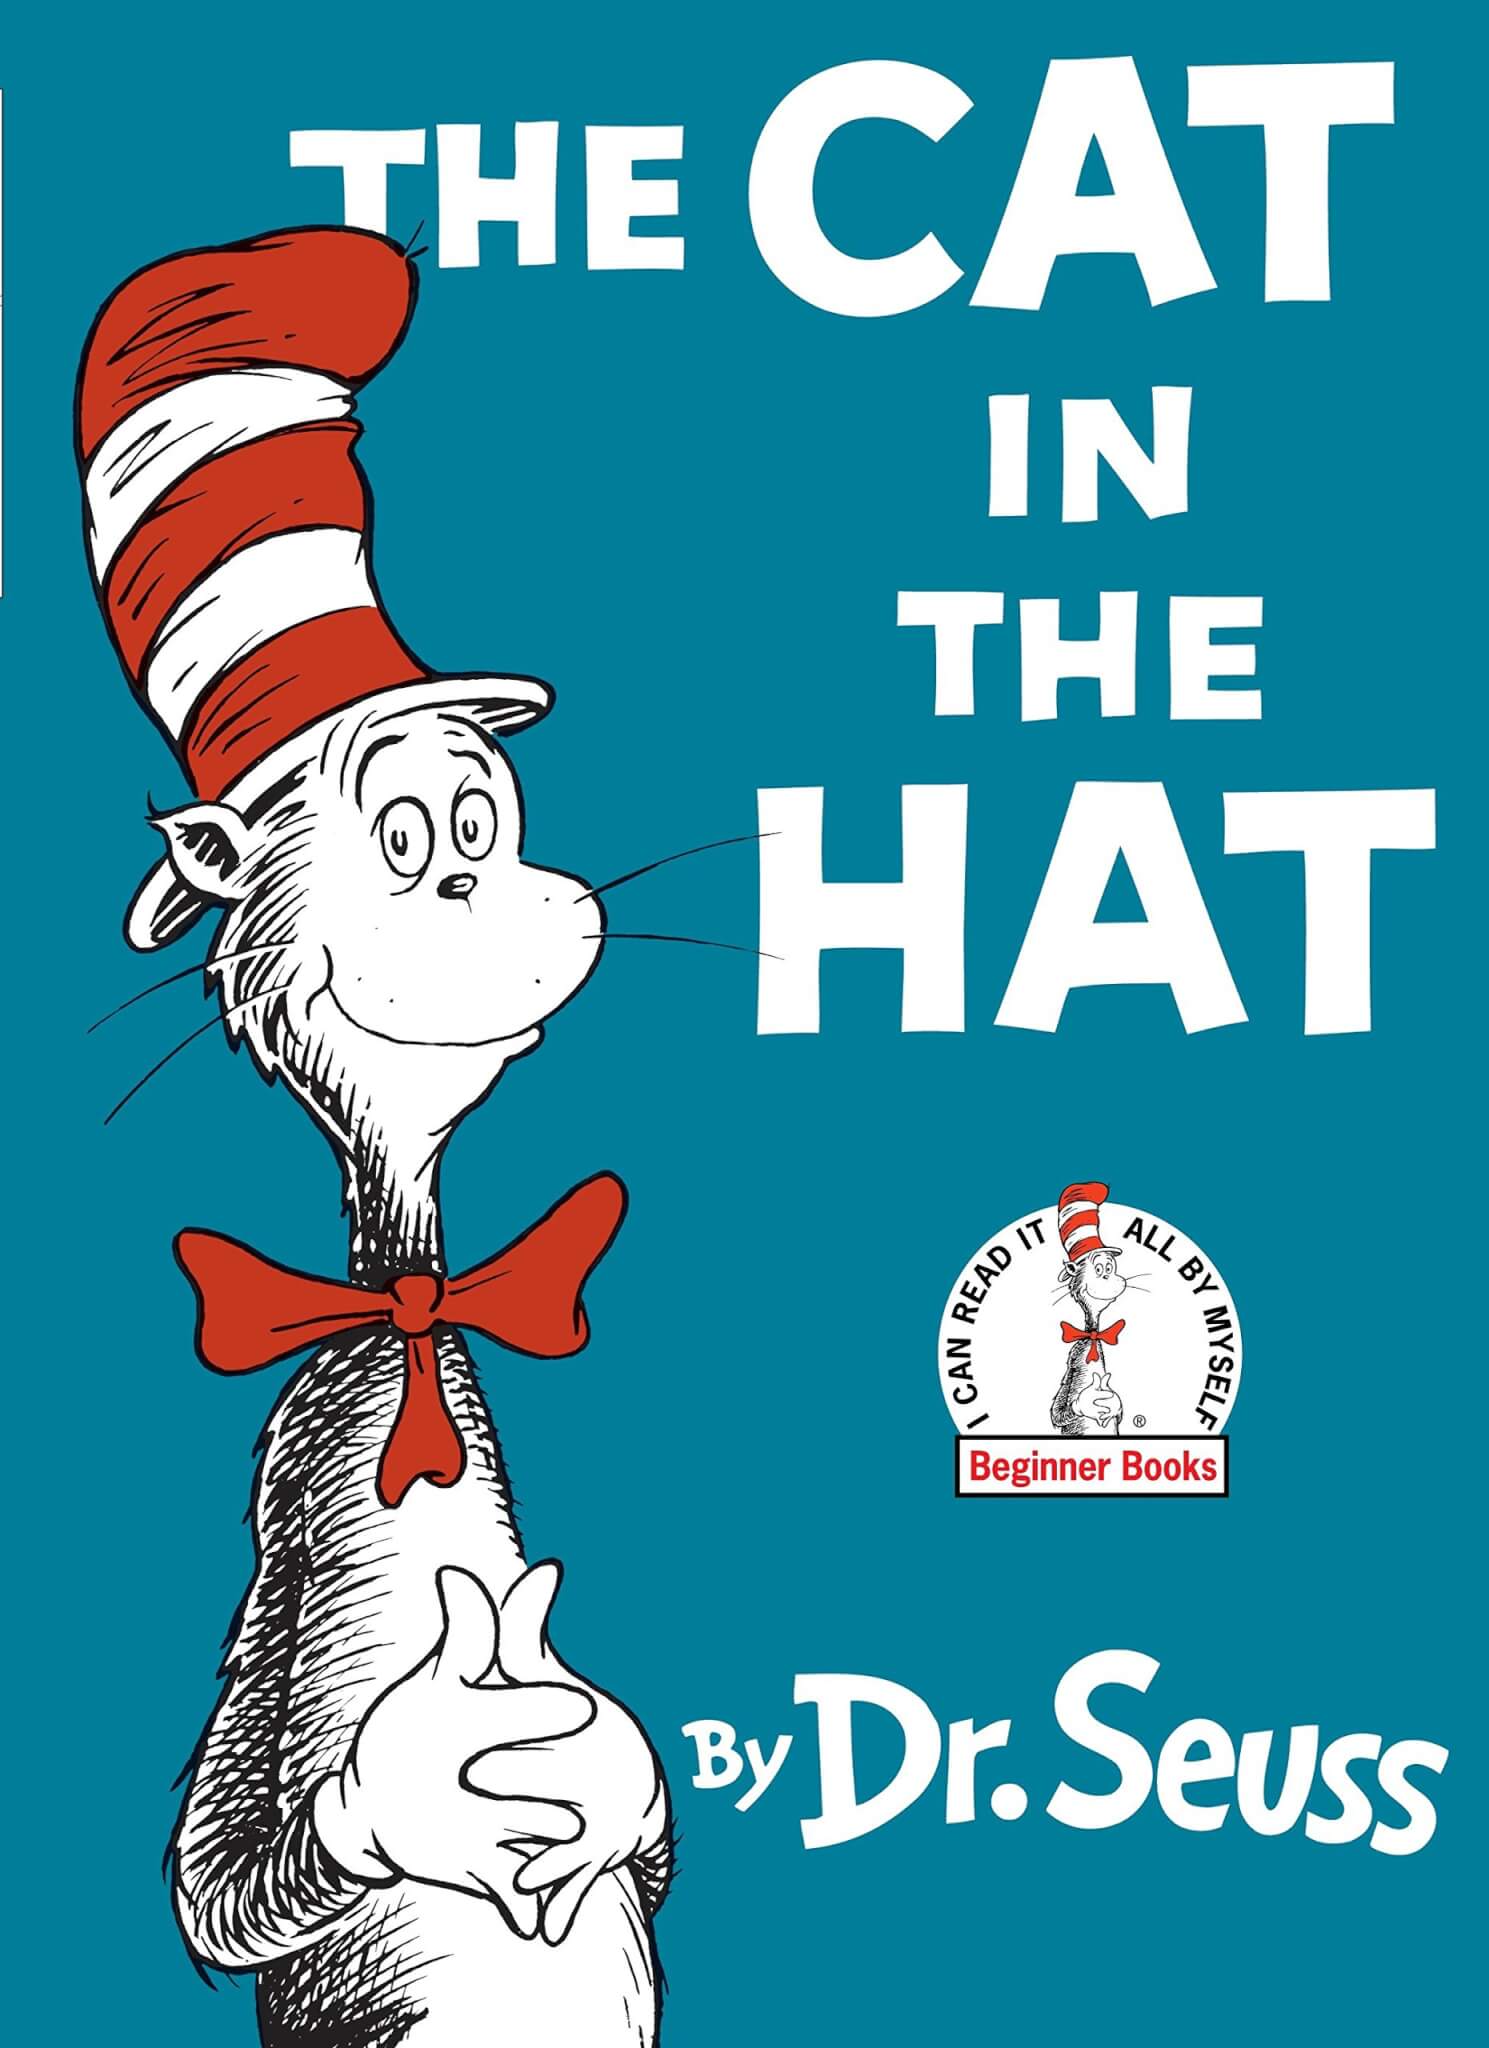 "The Cat in the Hat" (1957)